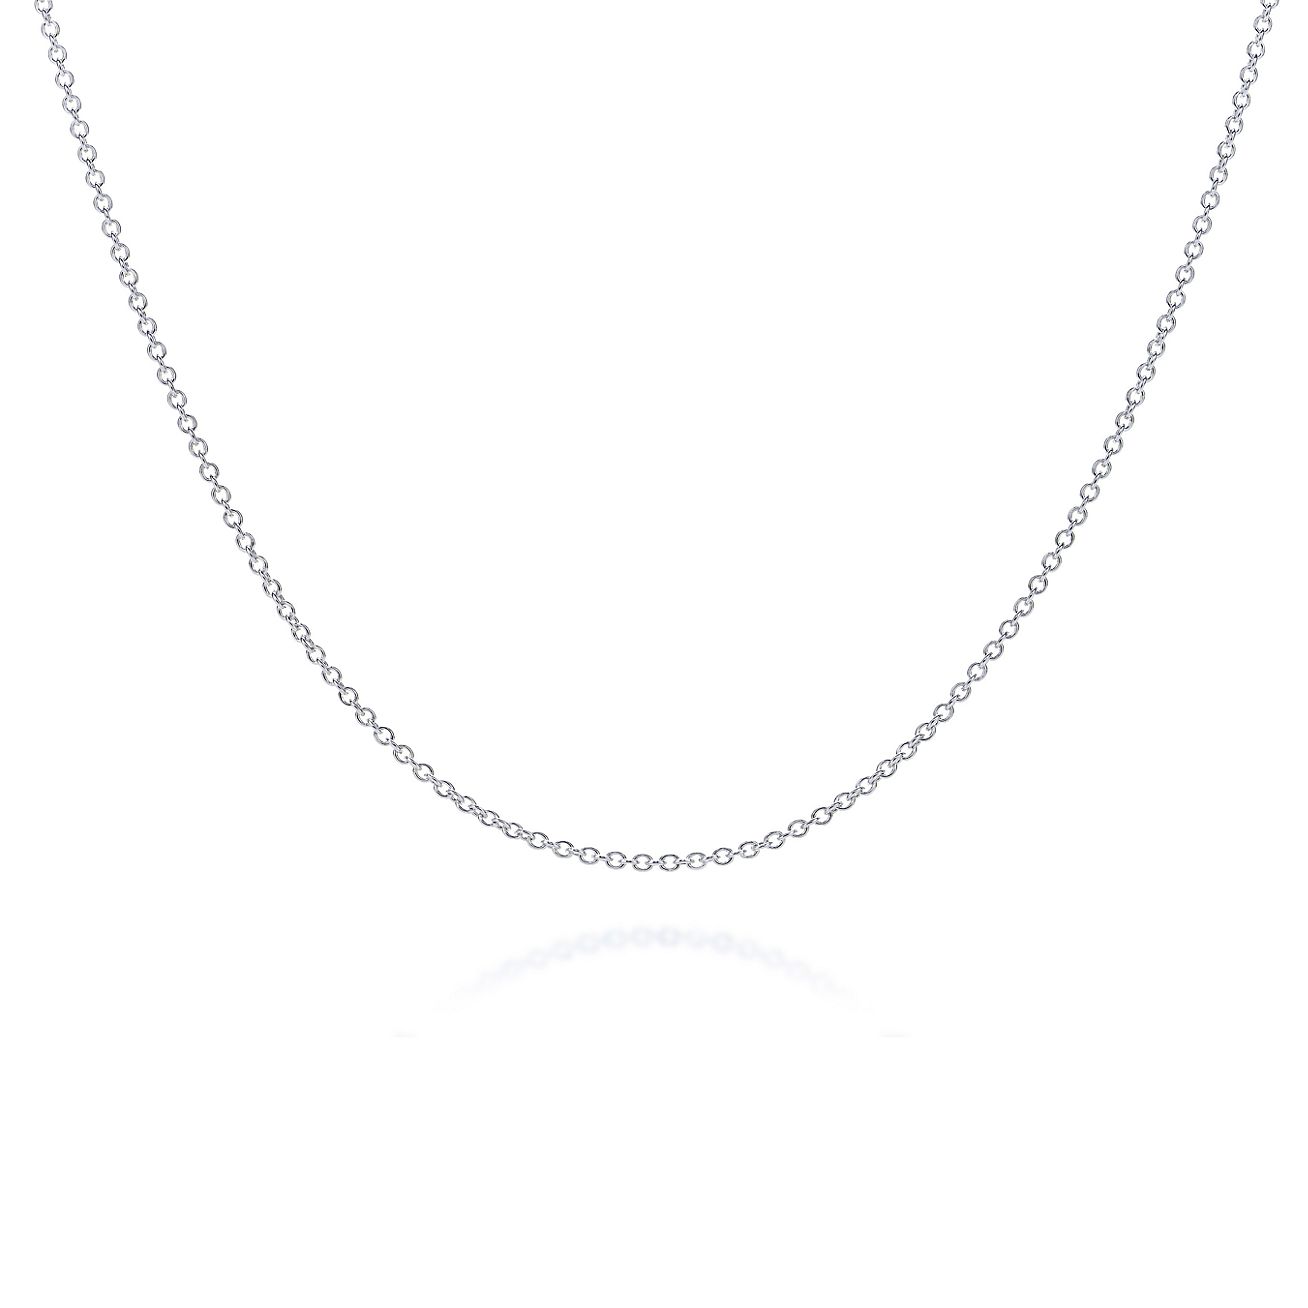 tiffany and co necklace length